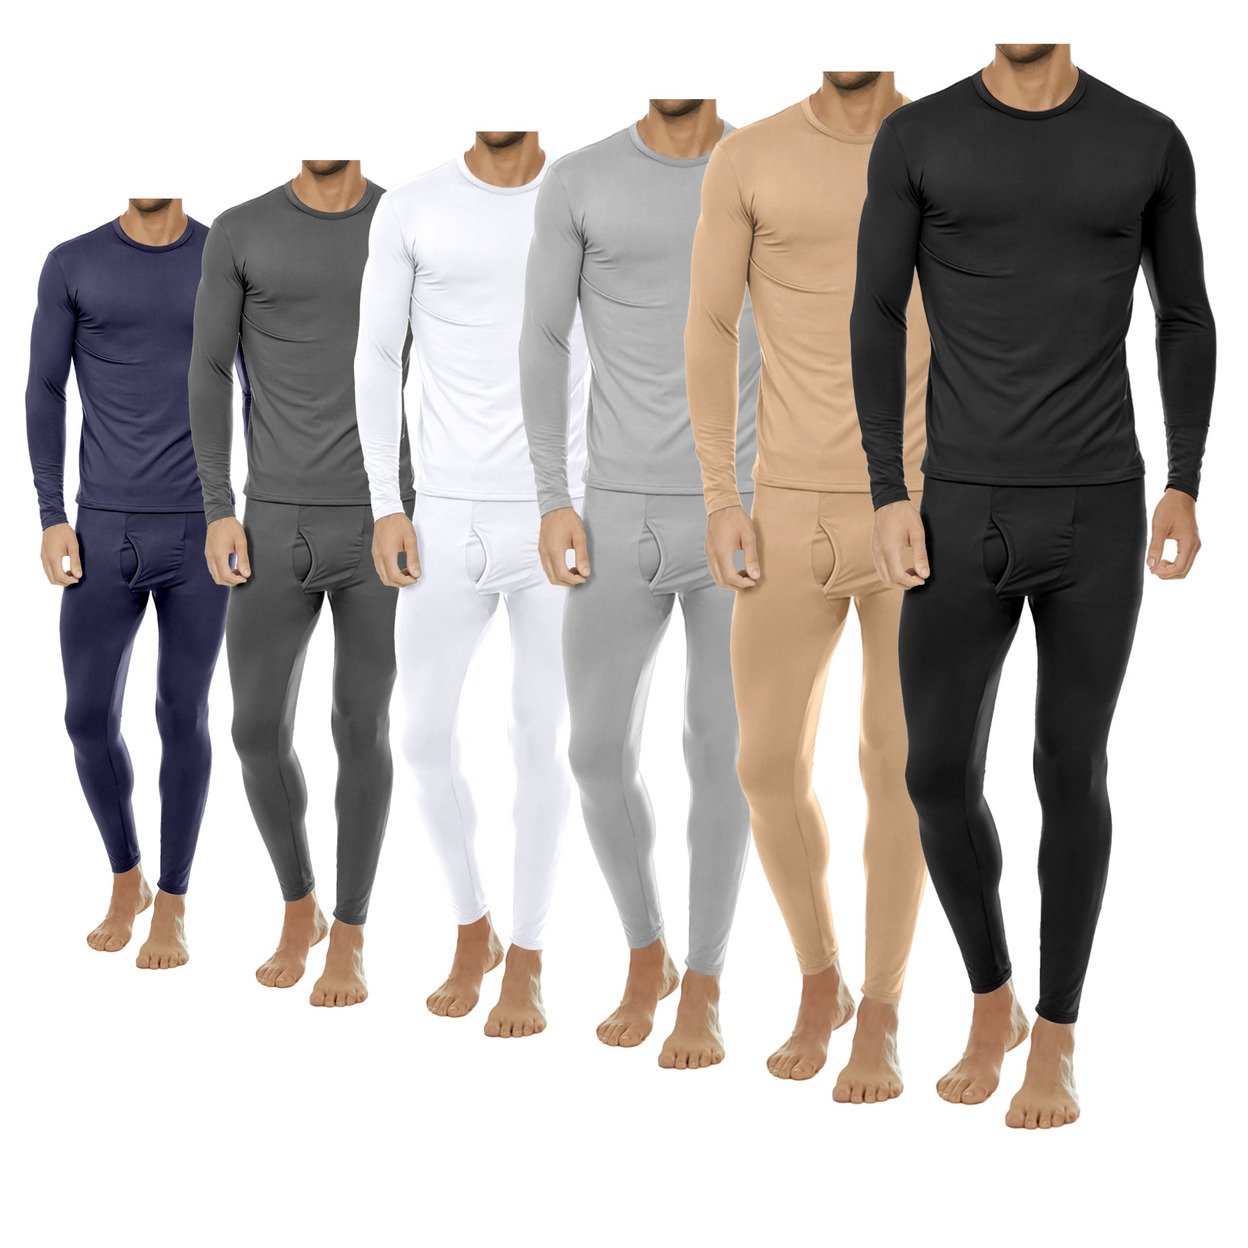 2-Sets: Men's Winter Warm Fleece Lined Thermal Underwear Set For Cold Weather - Navy&navy, Xx-large